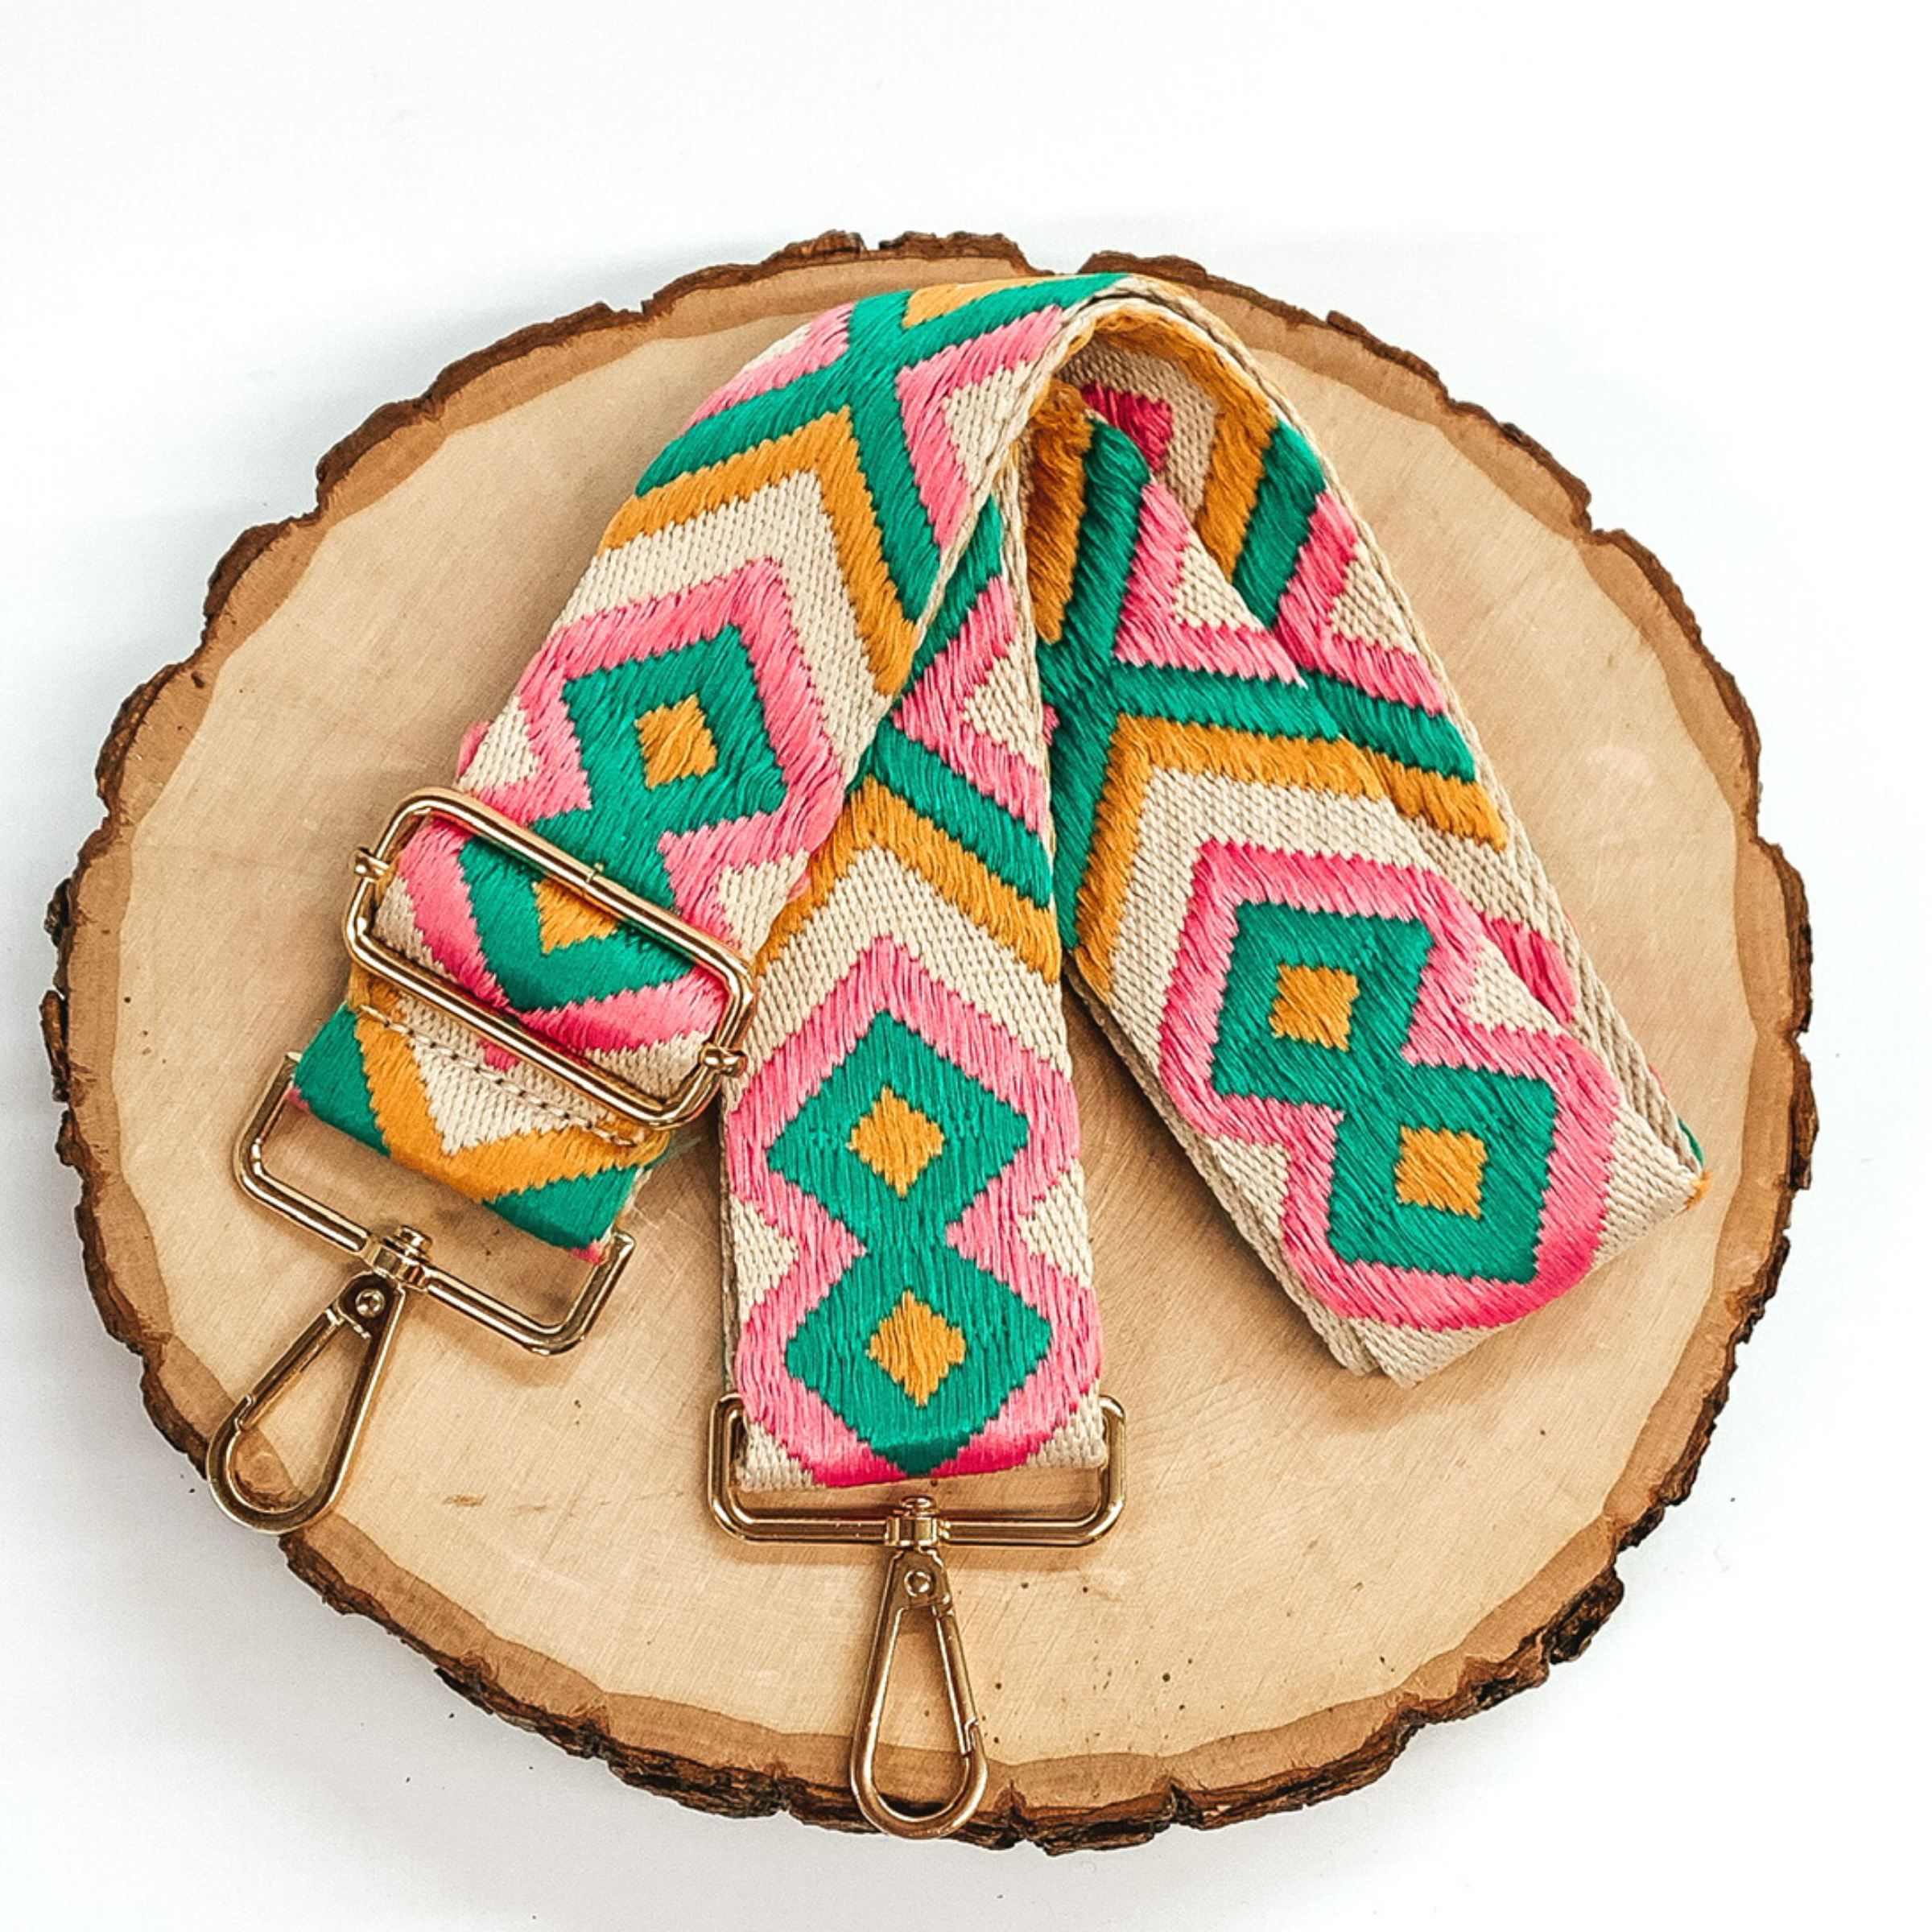 Beige canvas purse strap with yellow, pink, and teal embroidered design. This purse strap includes gold accents. This purse strap is pictured on a piece of wood on a white background. 